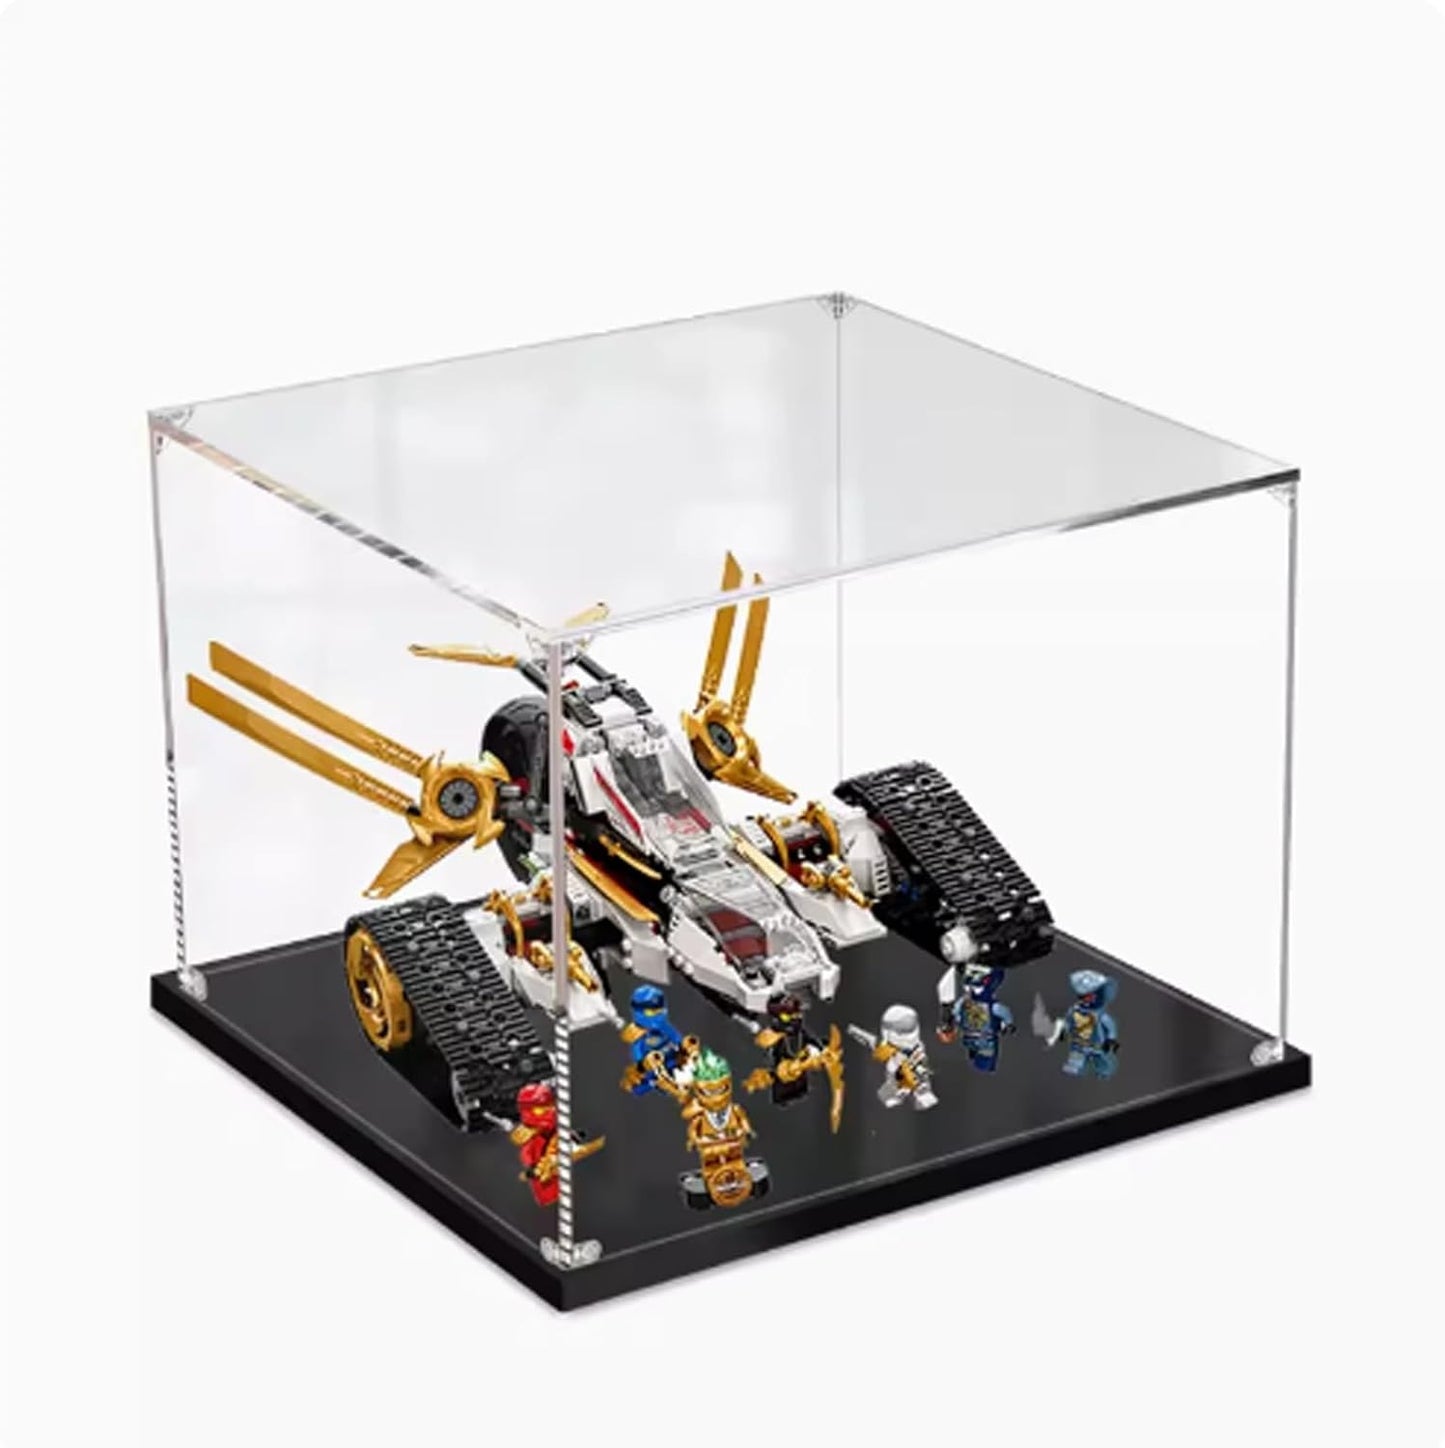 Acrylic Display Case Box Compatible Lego 71739 Supersonic Pursuit Vehicle Model, Protection, Dustproof Display Case Gift Model, Transparen,Compatible with Lego (Only Display Case ) (3mm)